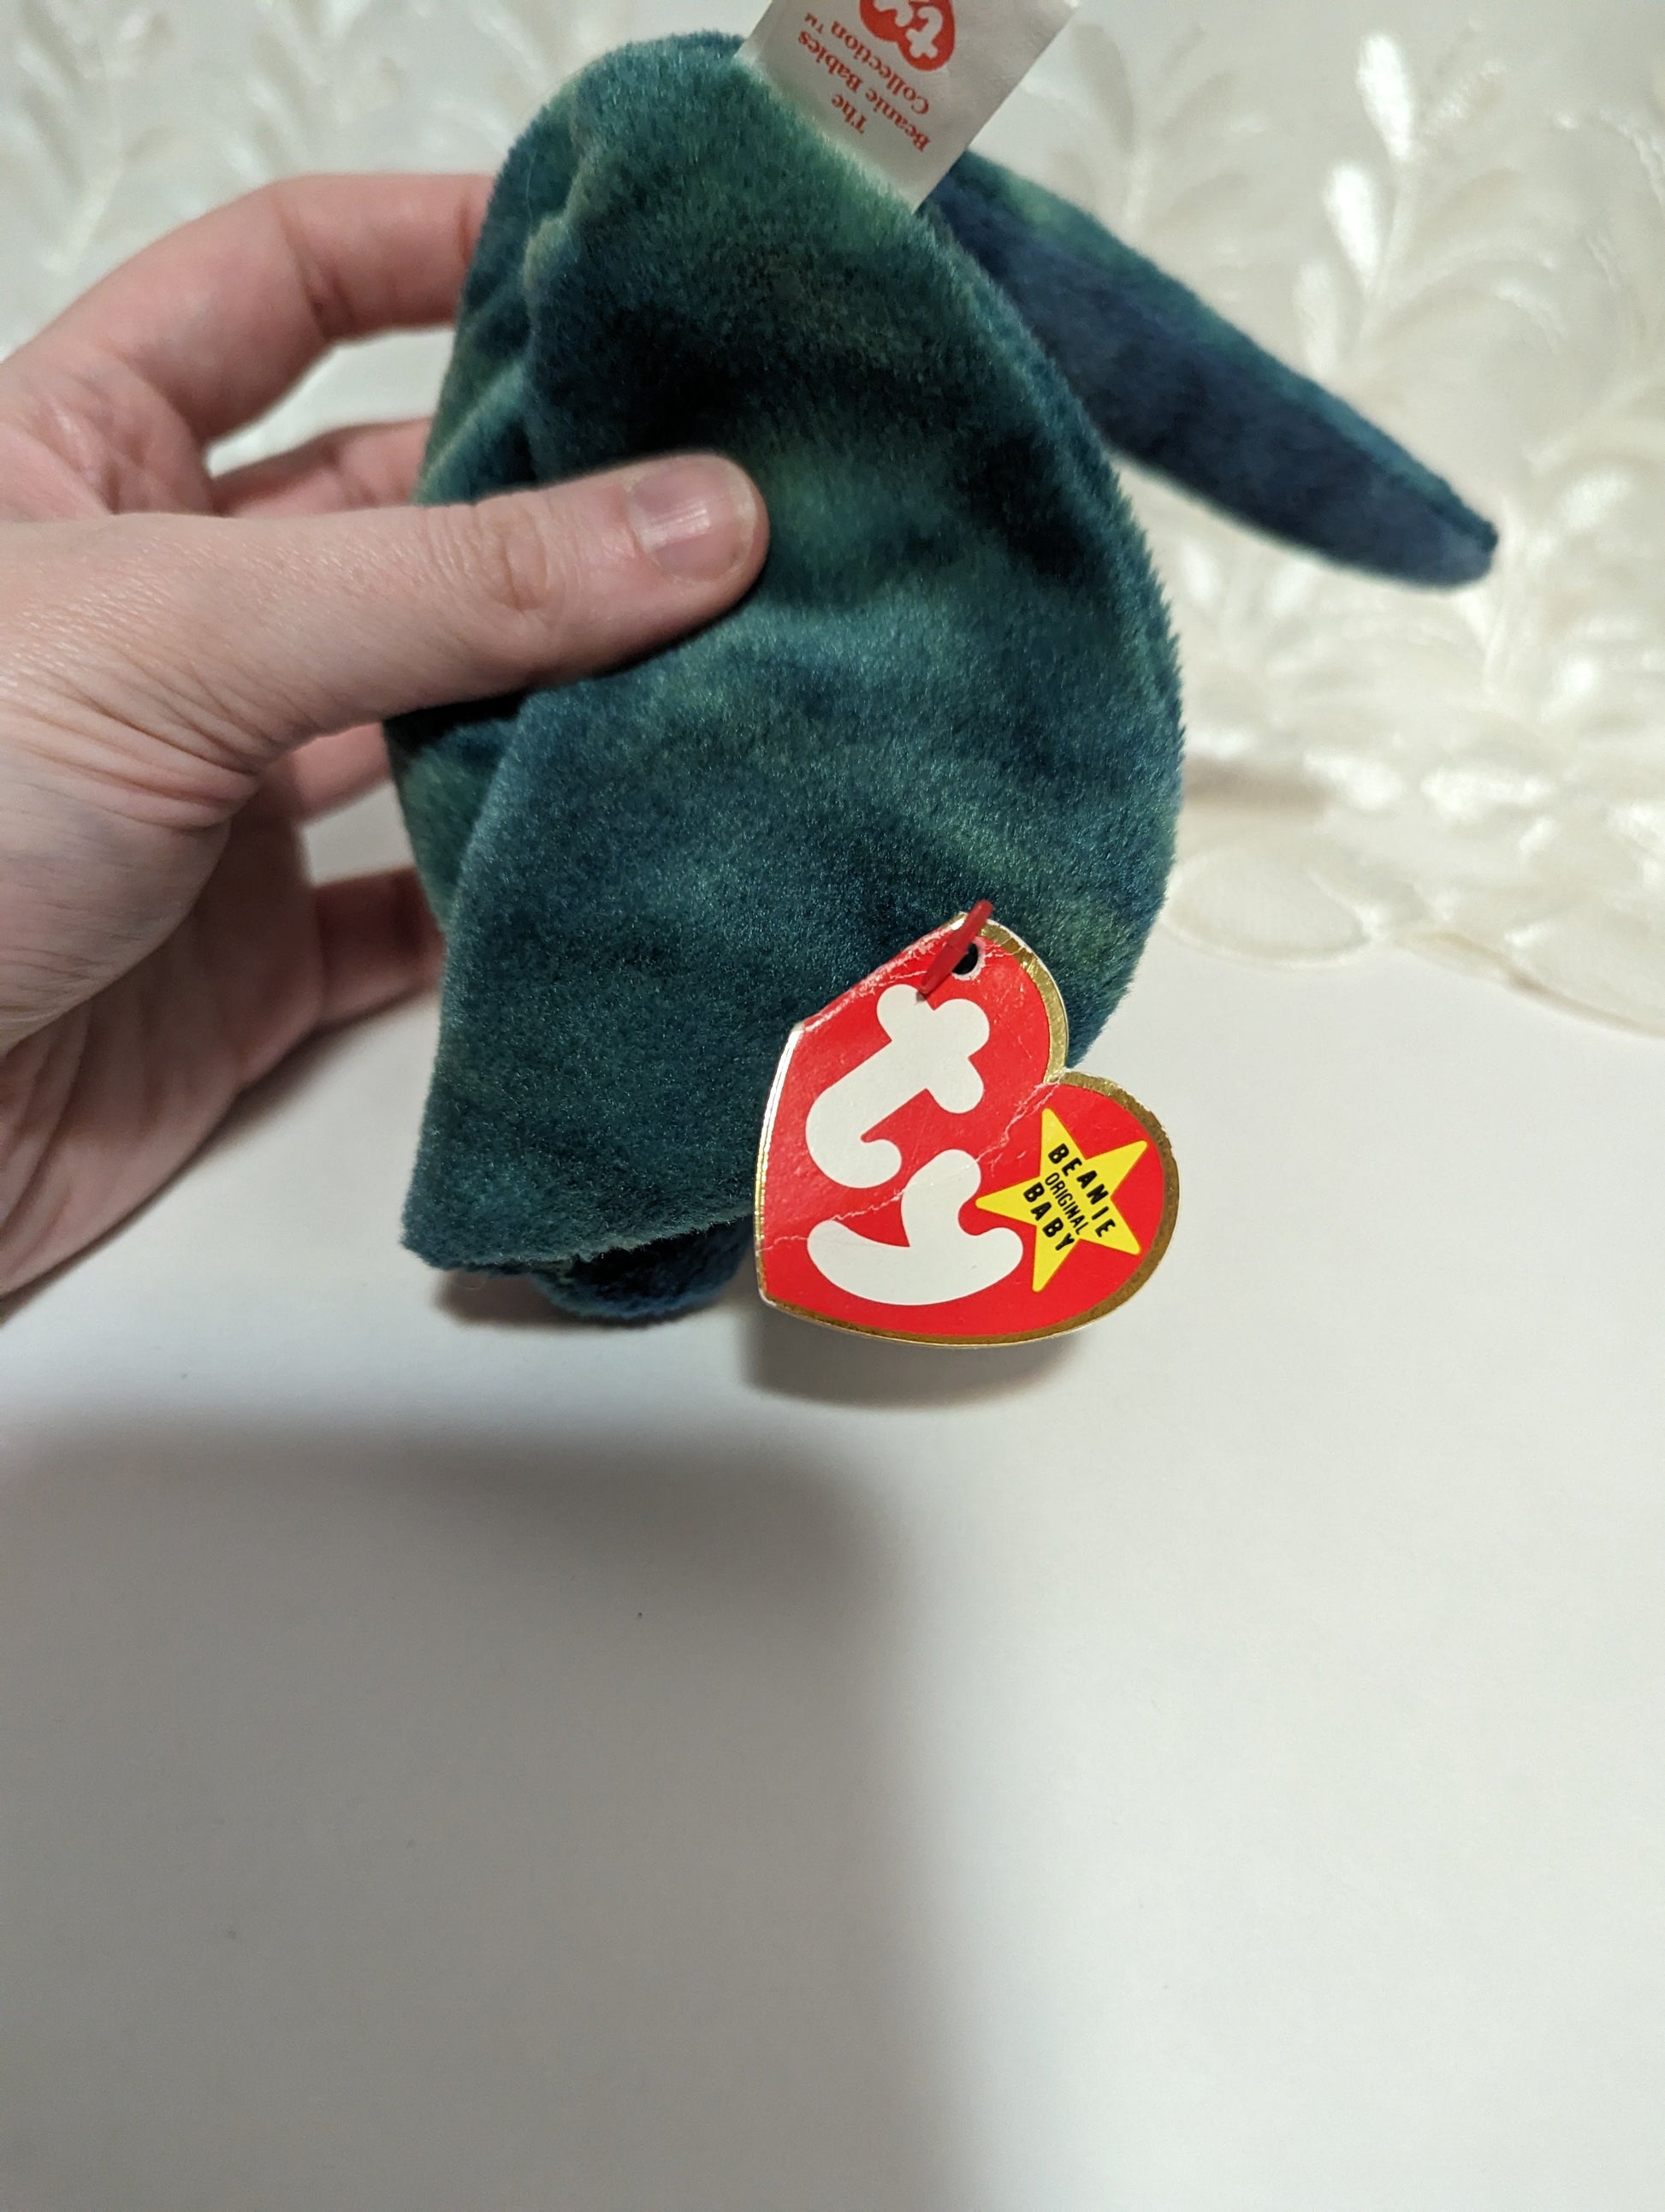 Ty Beanie Baby - Sting The Stingray (10in) Non-mint Tags - Vintage Beanies Canada